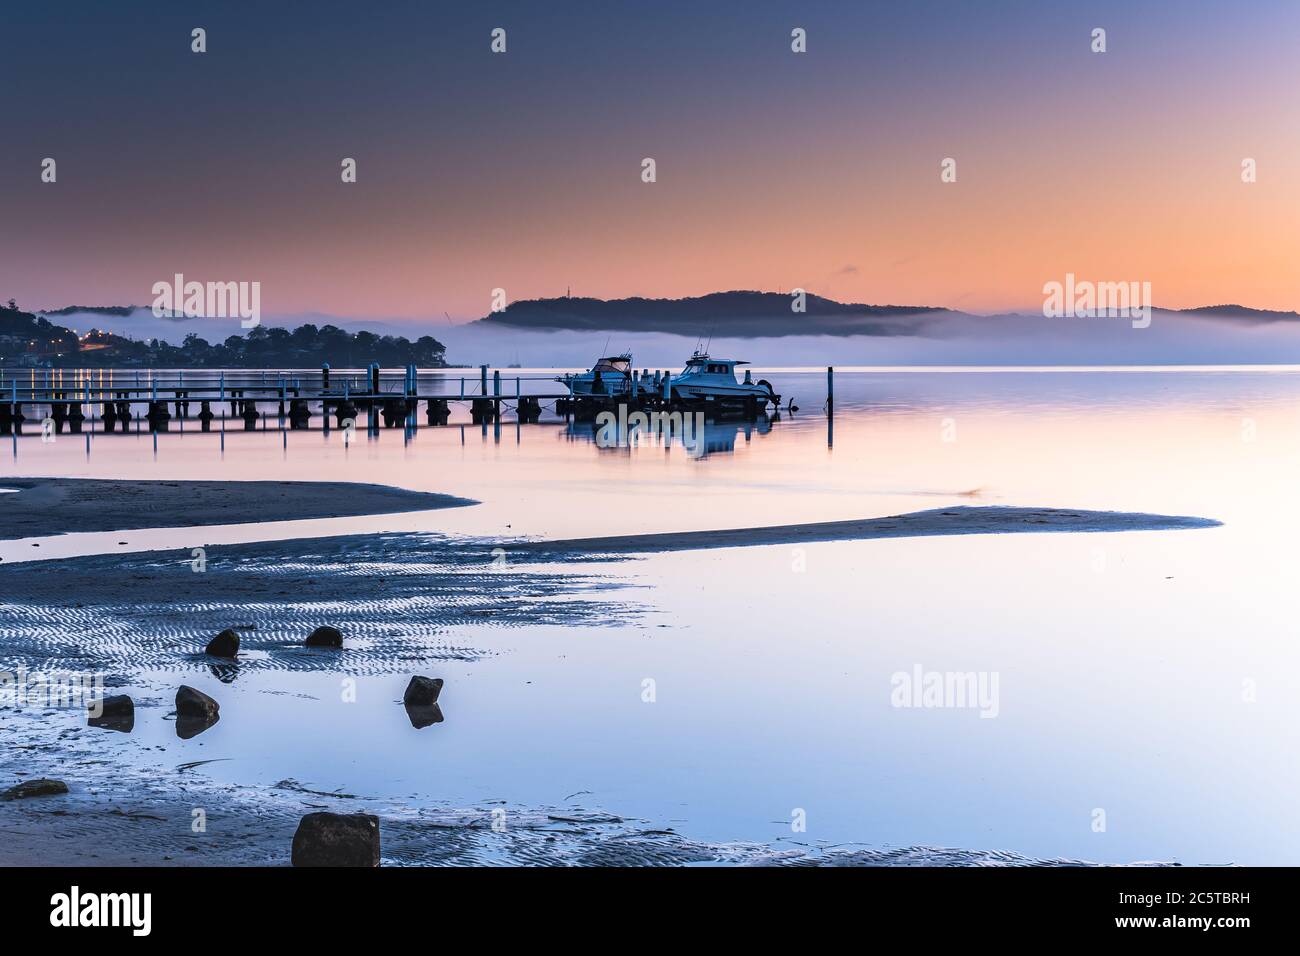 Misty Morning Sunrise Waterscape from Koolewong Waterfront on the Central Coast, NSW, Australia. Stock Photo